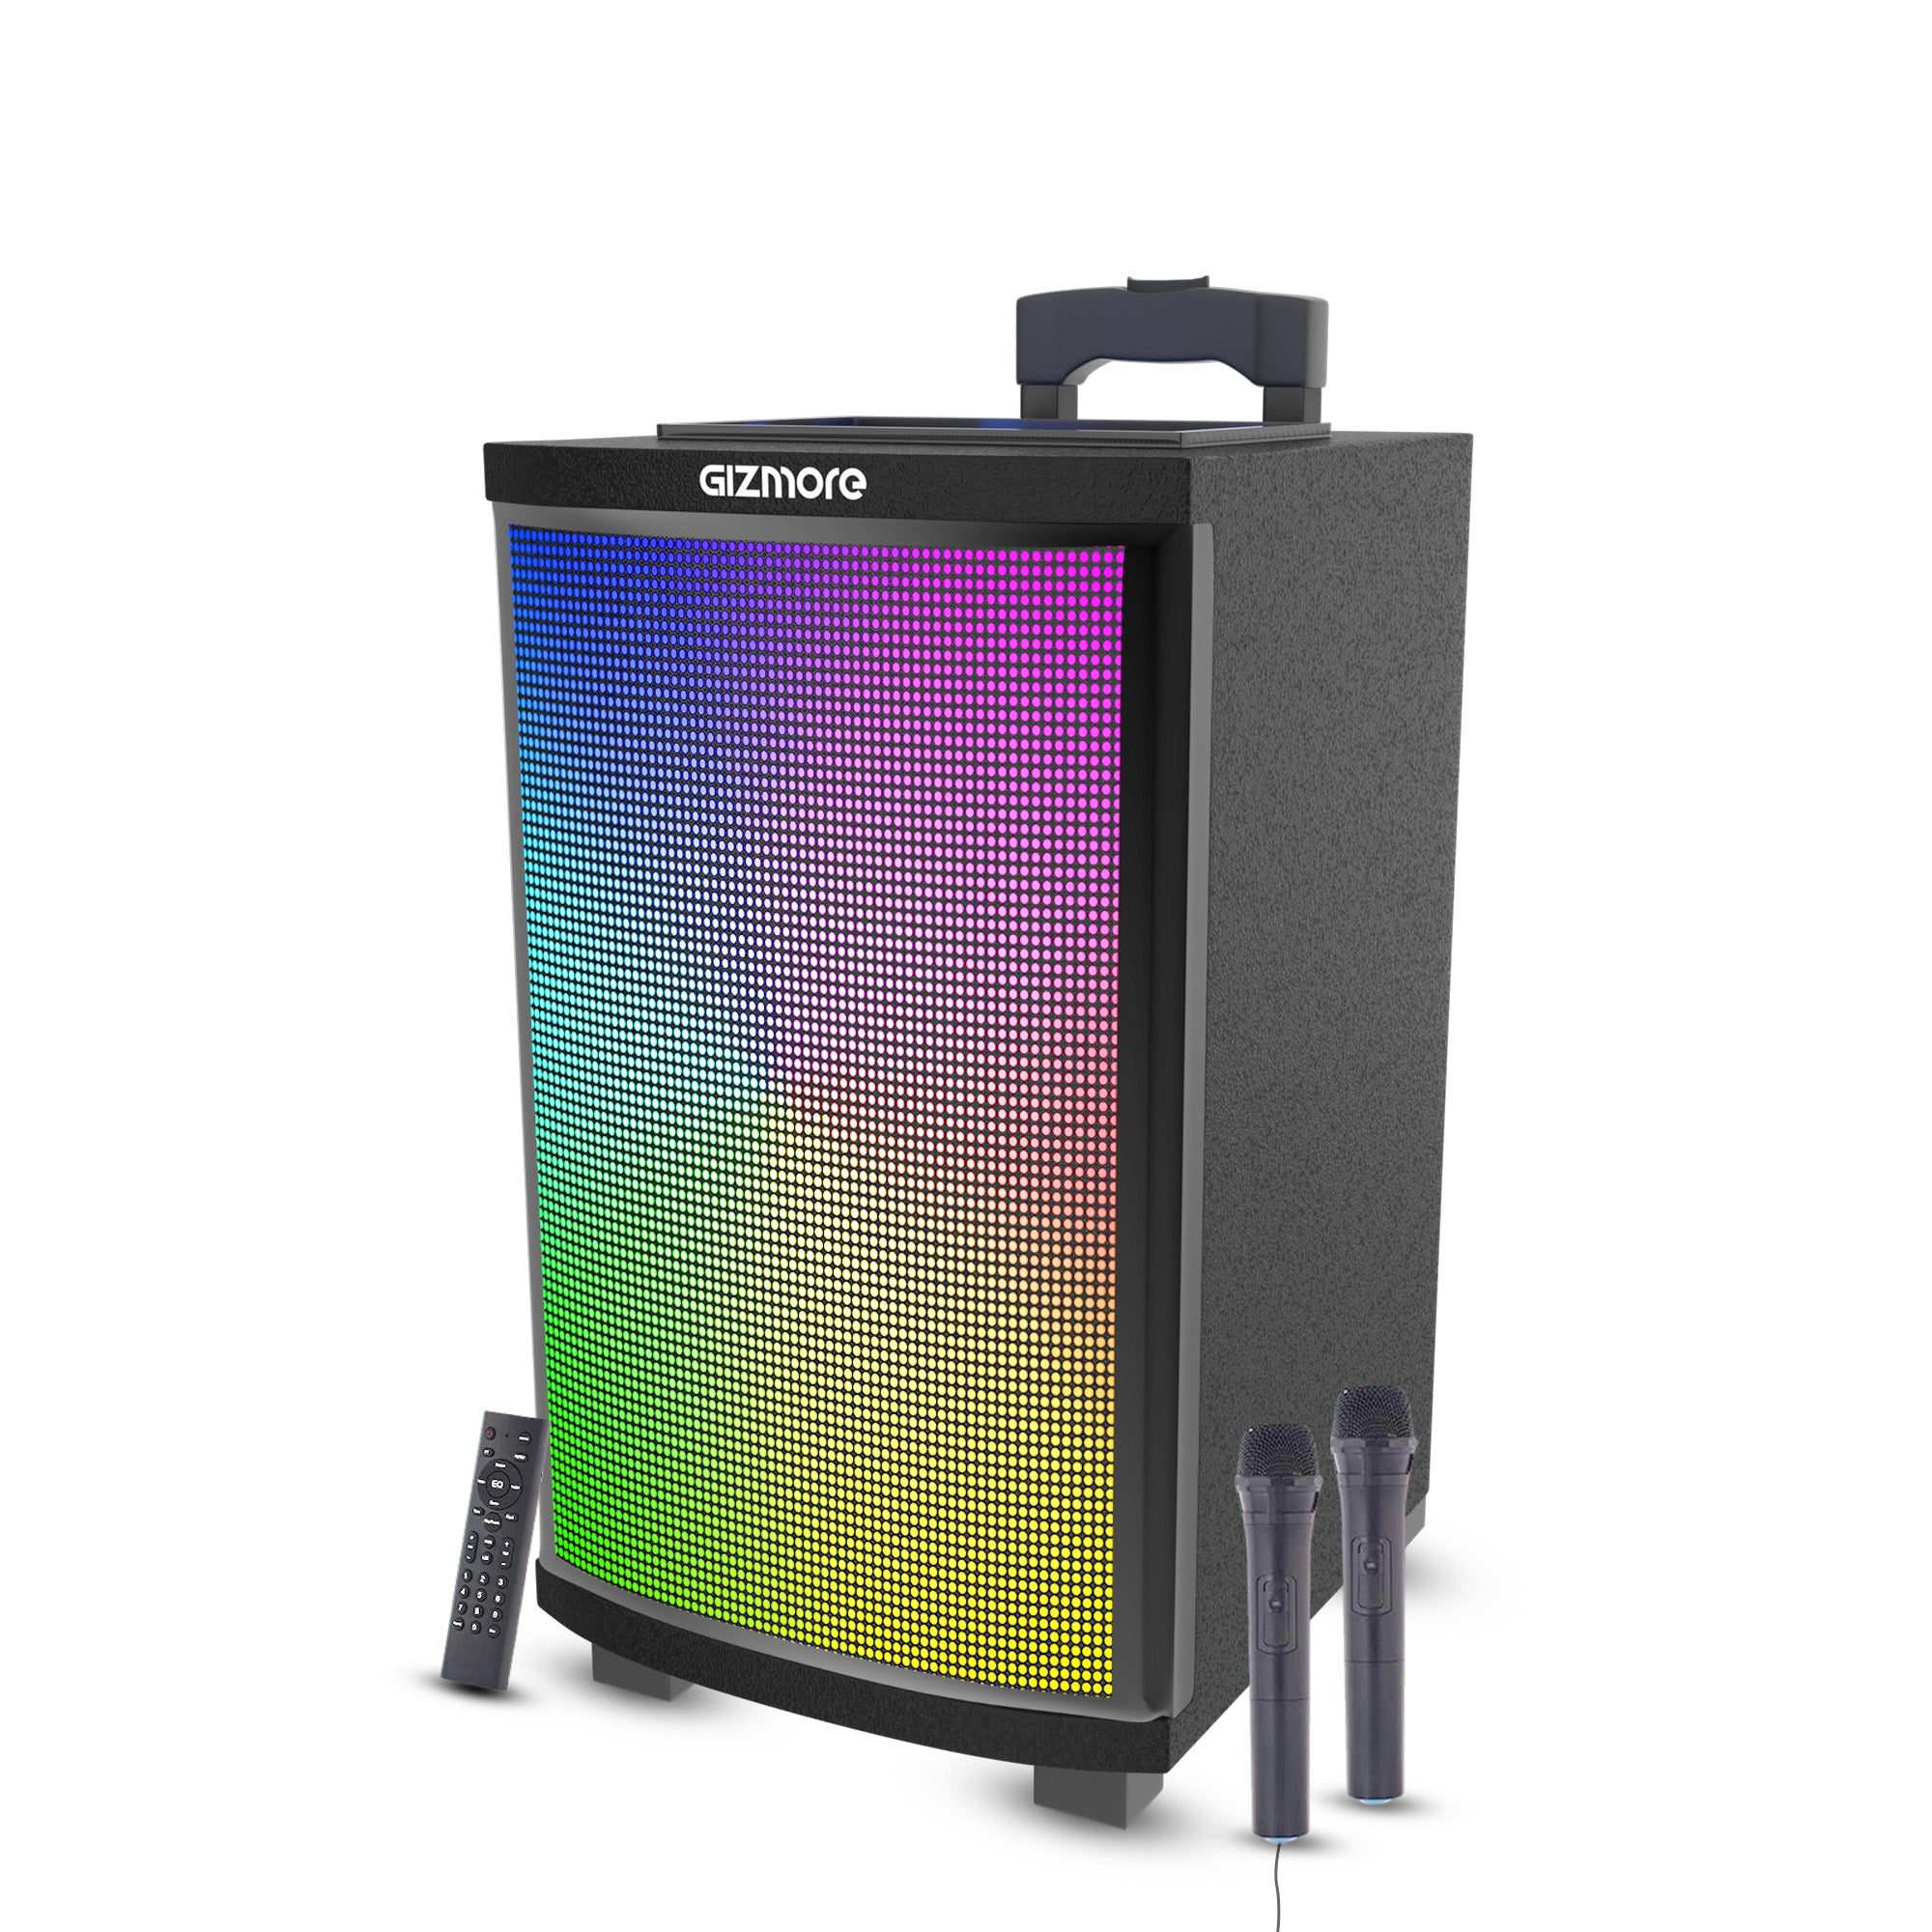 GIZMORE 200W Thunder DJ Trolley Outdoor Party Speaker with UHF Wireless MIC & Wired MIC, 6 Hrs Playtime, Digital LED Display, Full Body RGB Lights, Multiple Connectivity Bluetooth, USB, FM, AUX & SD Card and Remote Control